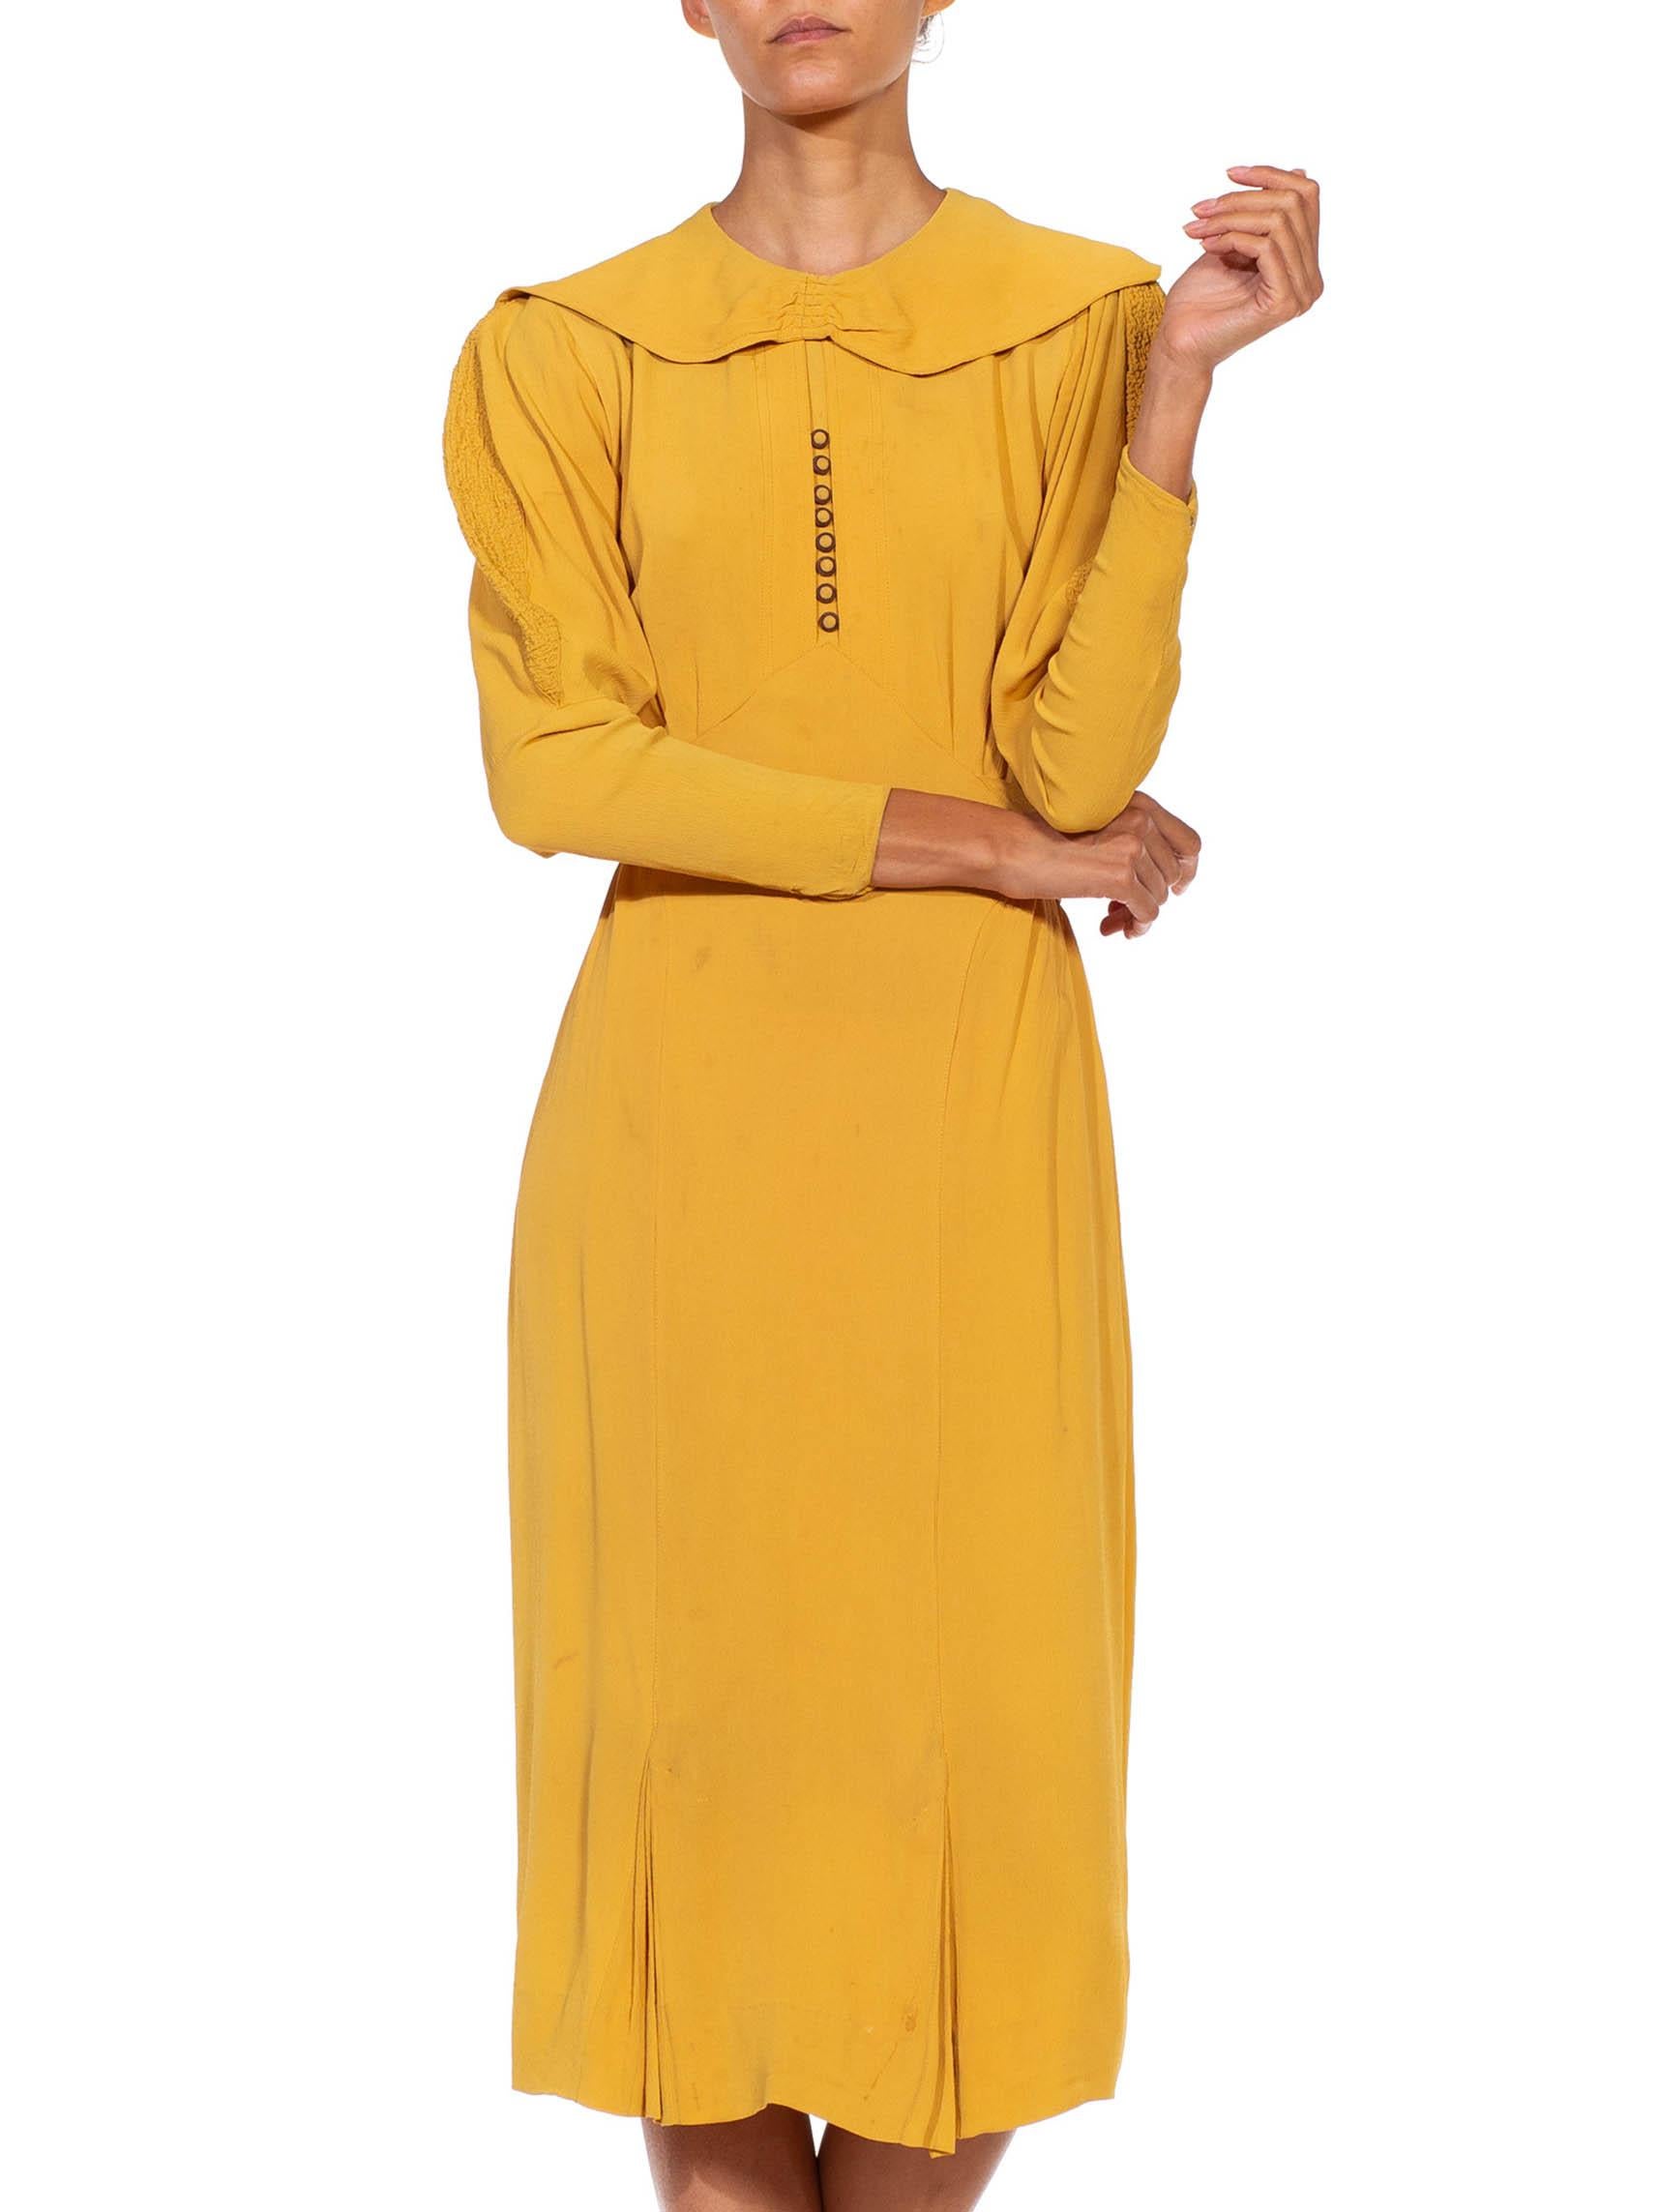 1930S Mustard Yellow Rayon Crepe Caplet Dress With Leg O Mutton Sleeves For Sale 3